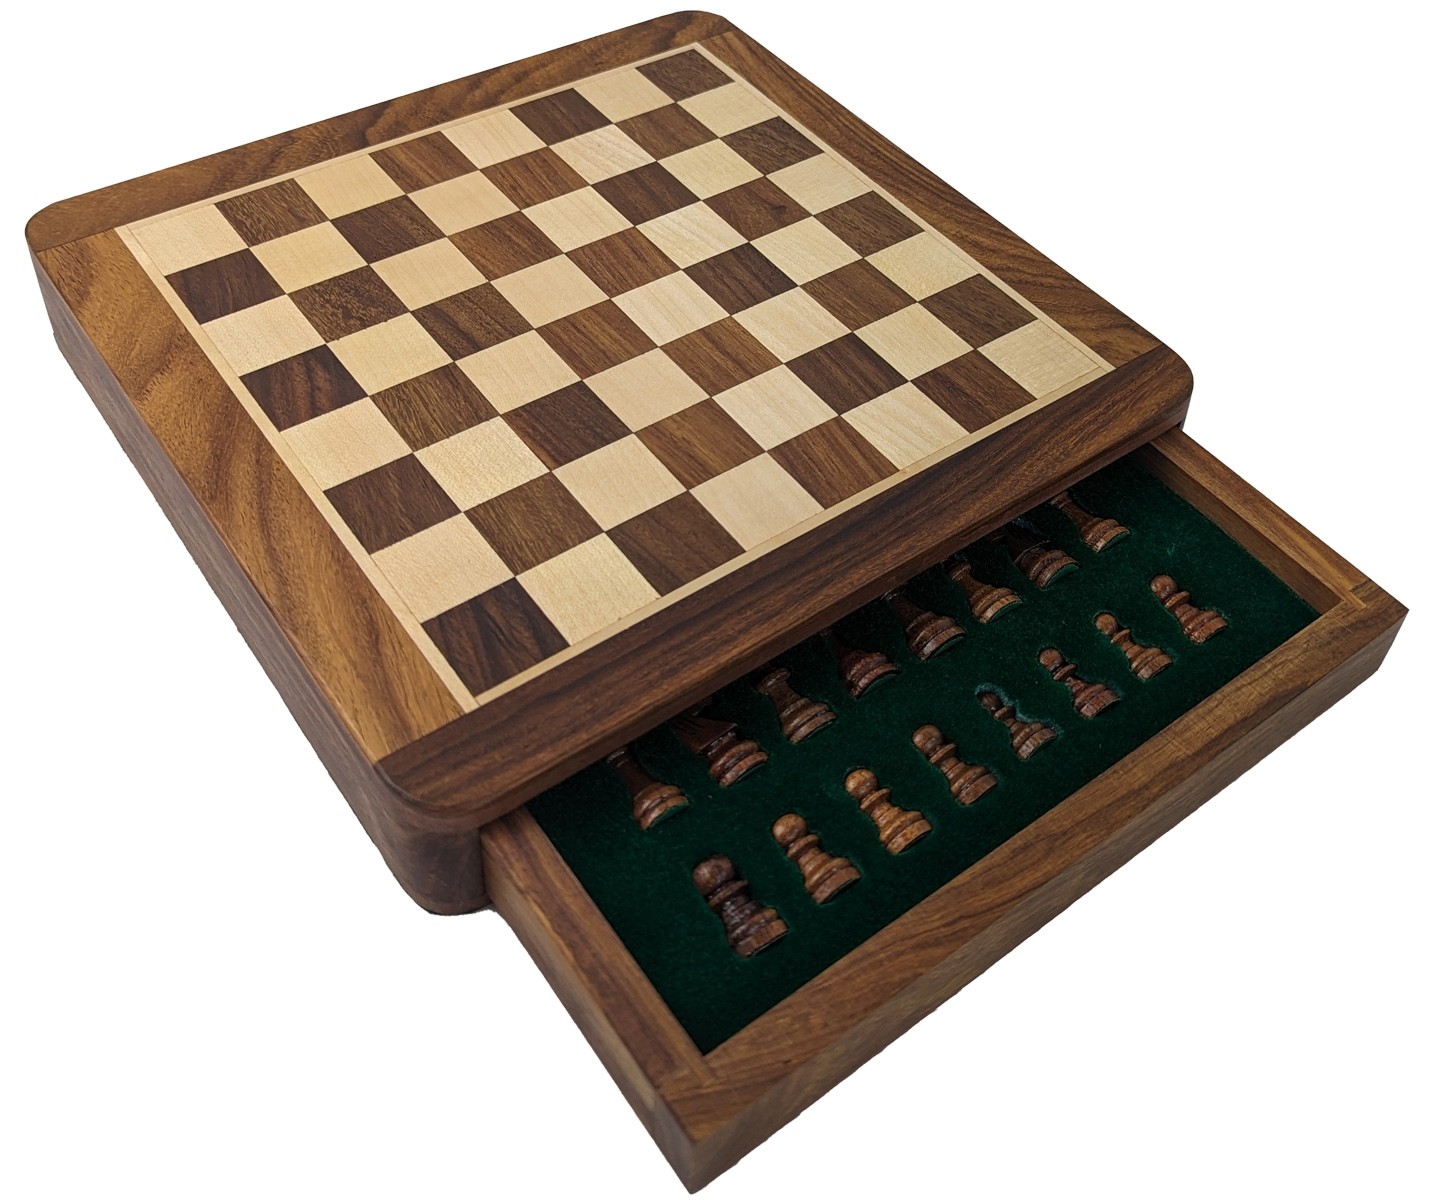 Square Magnetic Chess Foamed Tray Inside 25cm